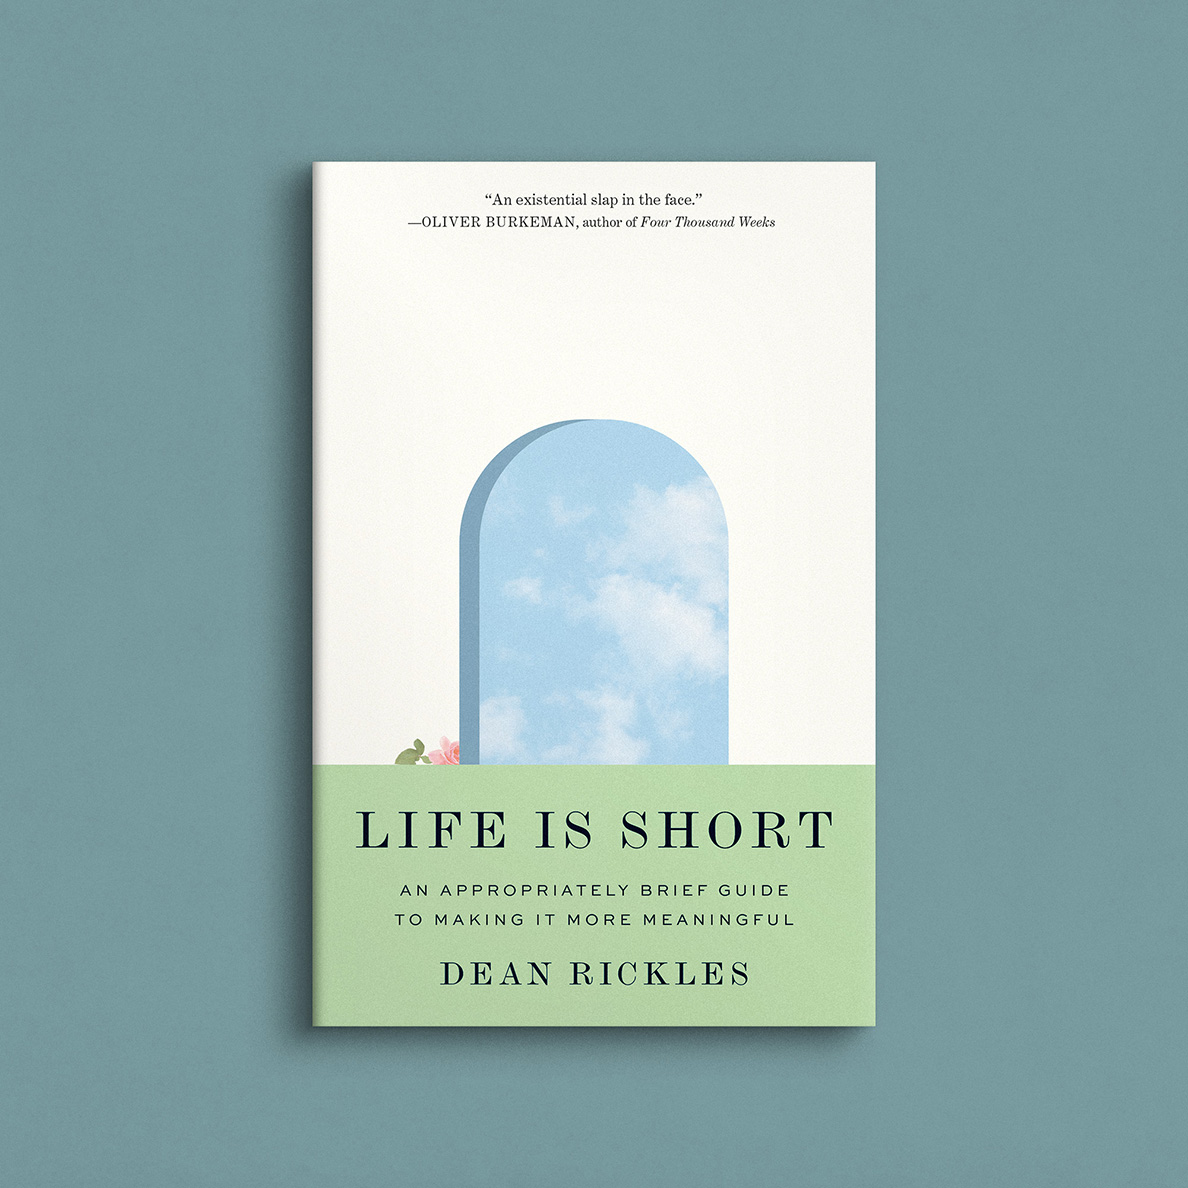 Life Is Short book cover